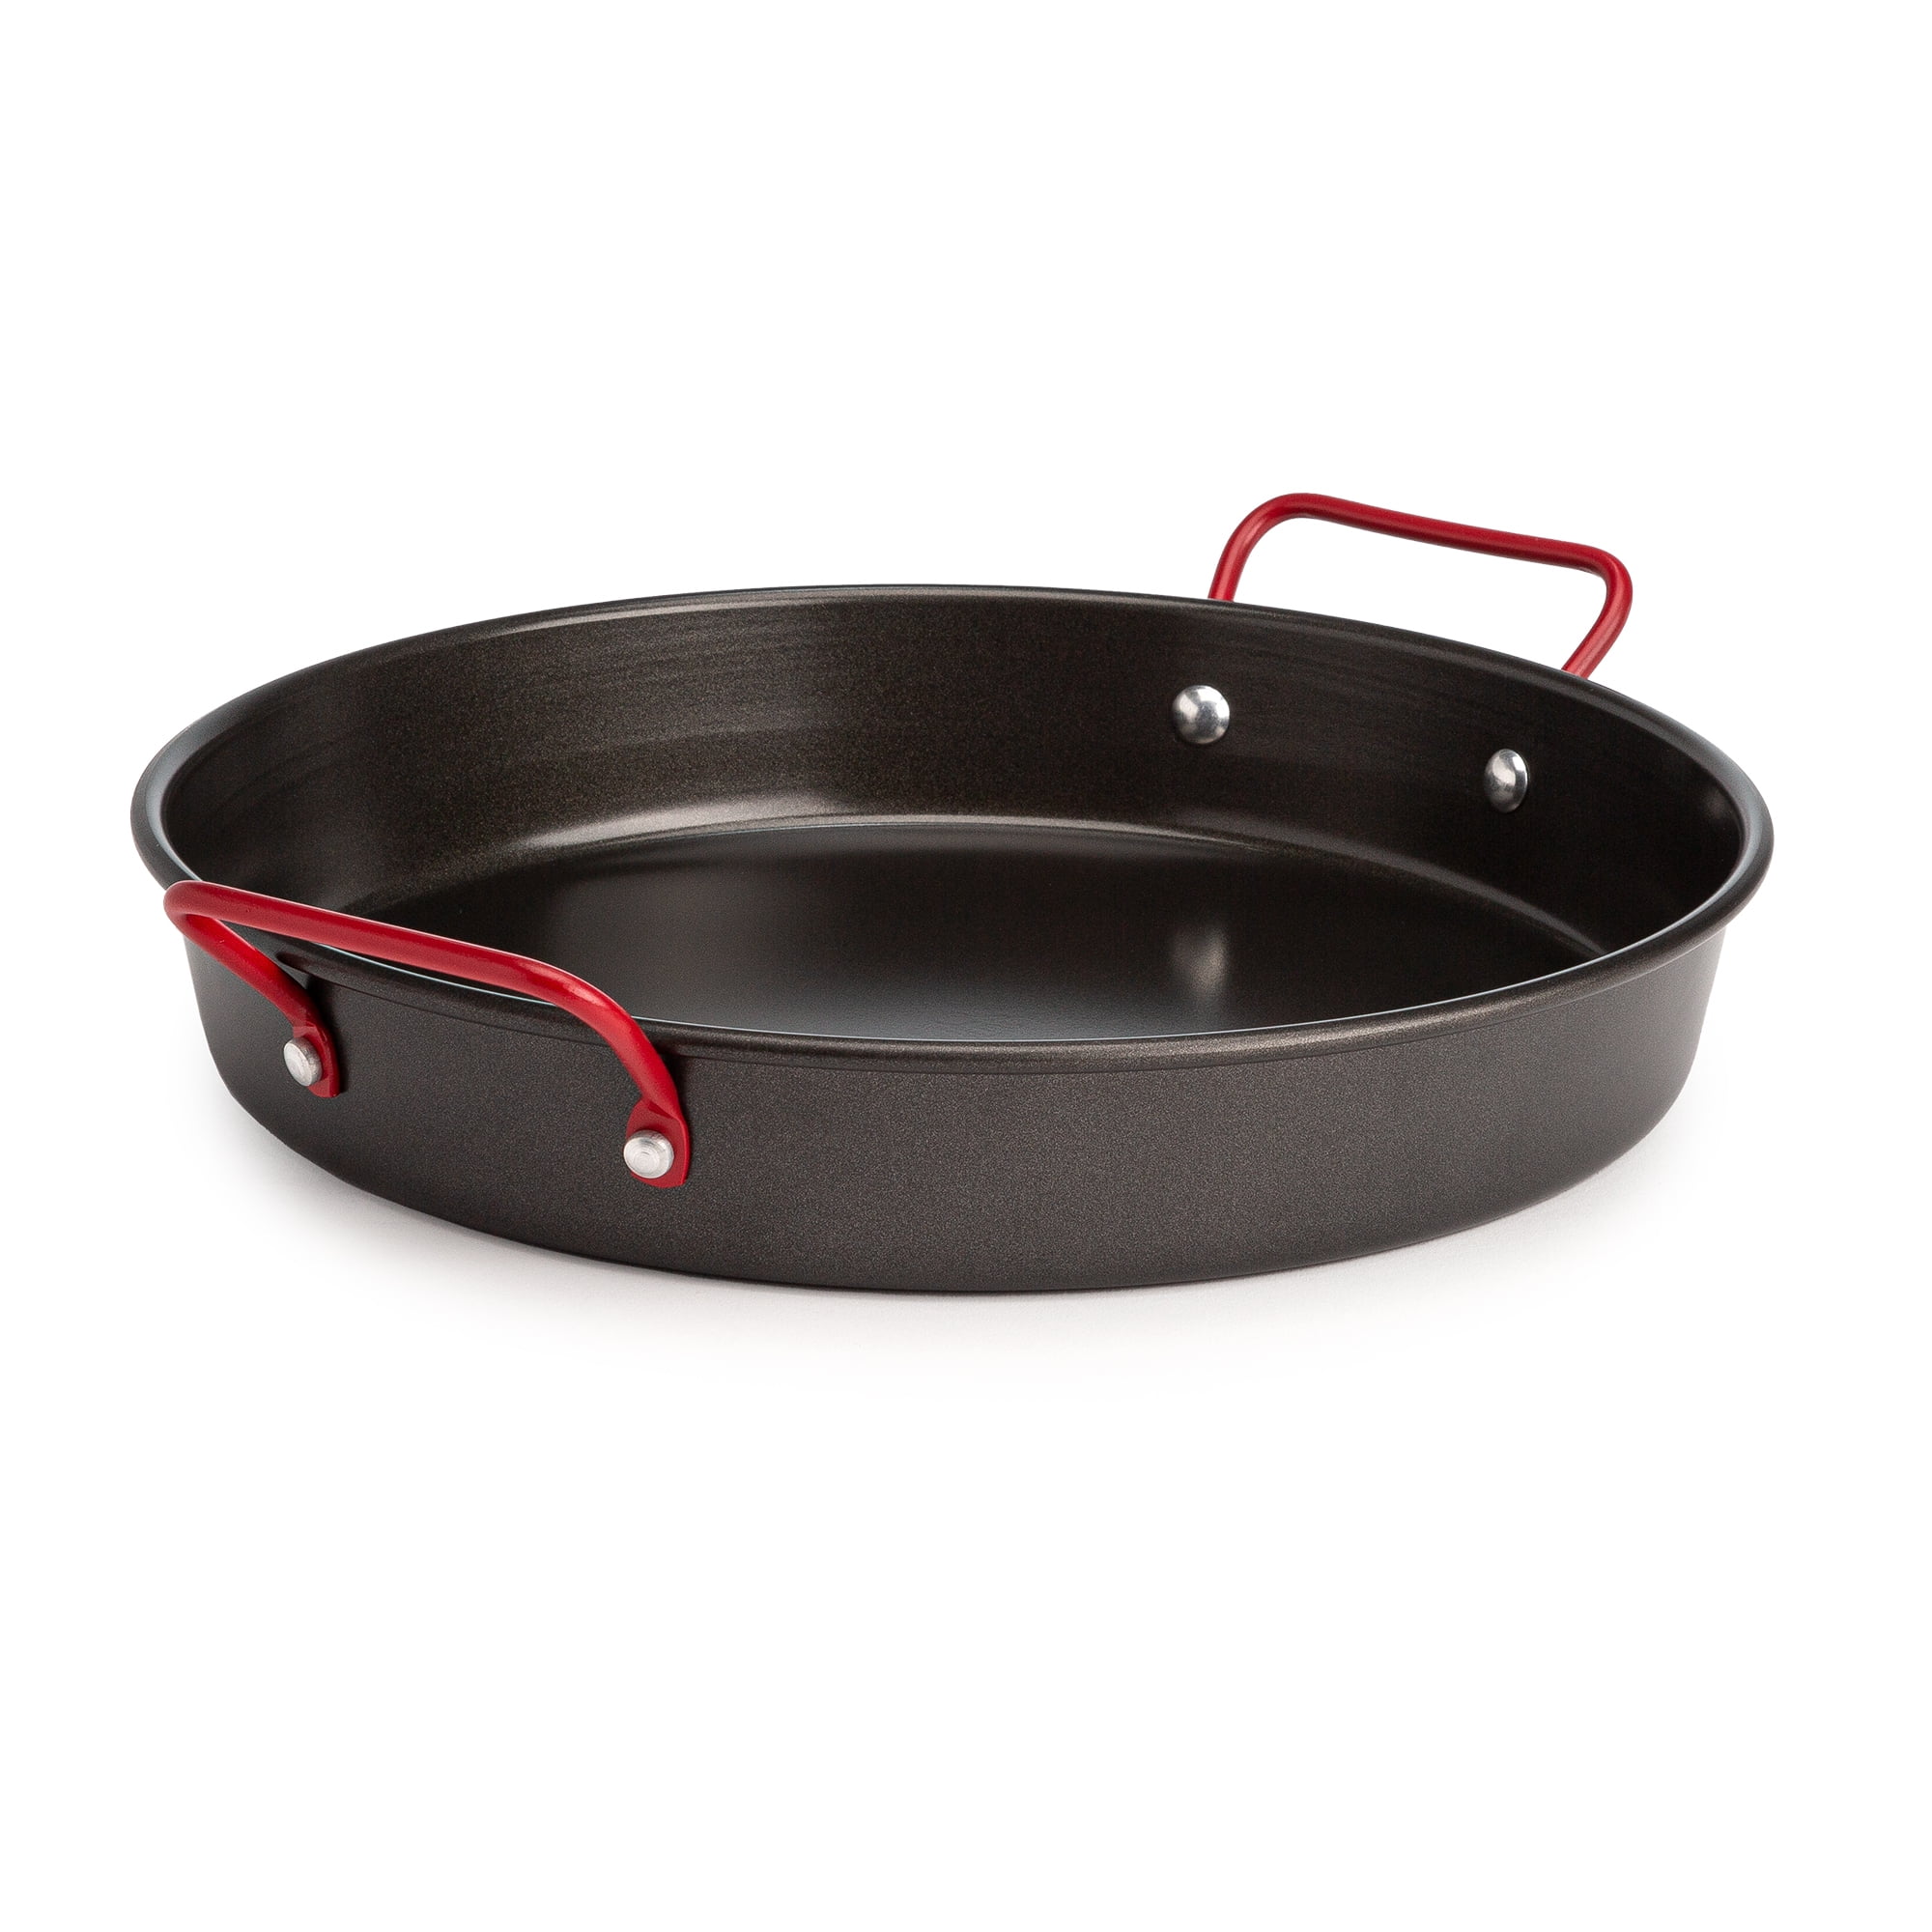 Le Creuset 3-Ply Stainless Steel Non-Stick Omelette Pan - 20cm for Women